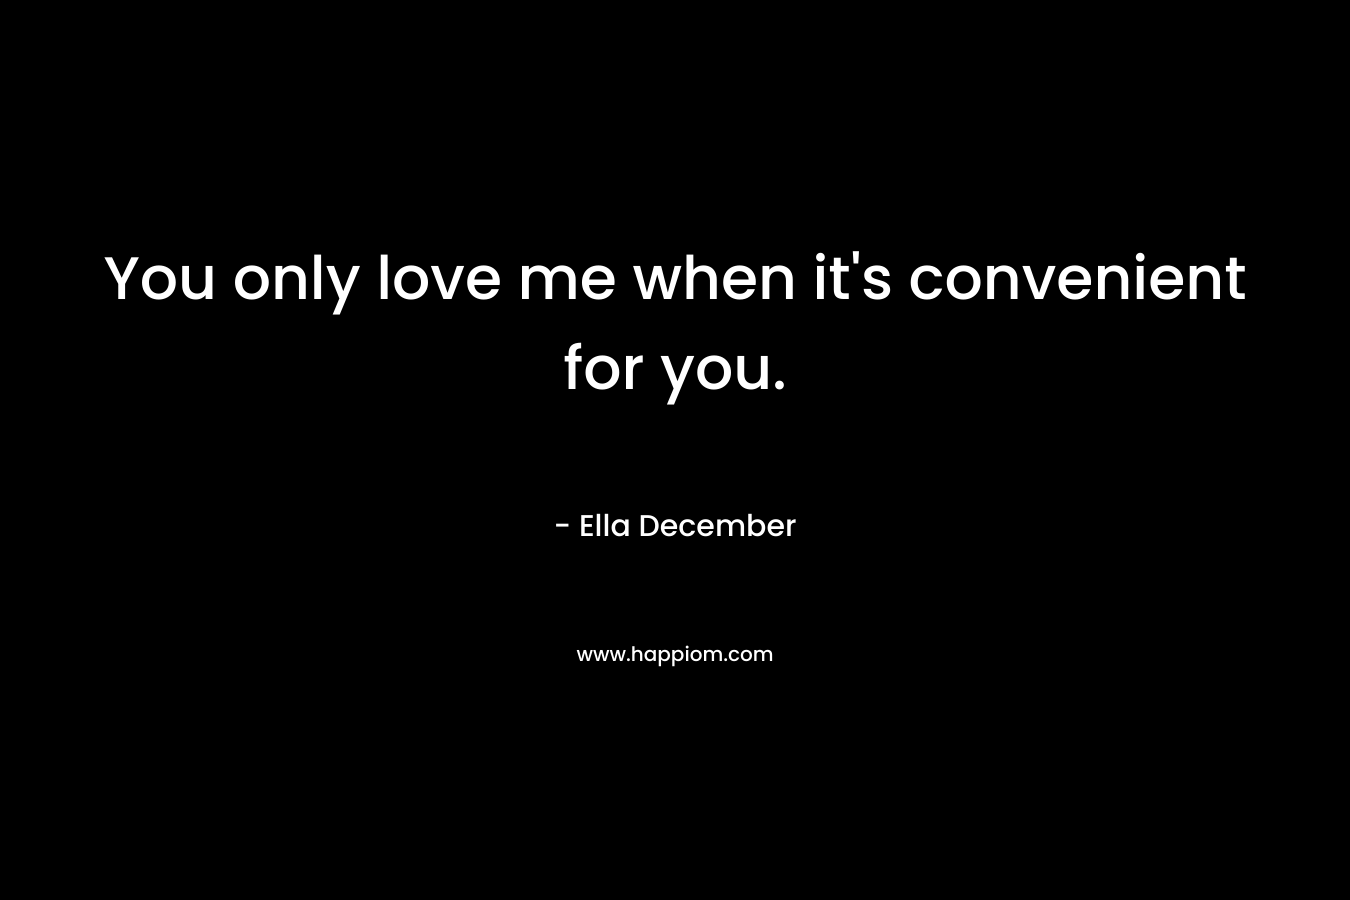 You only love me when it’s convenient for you. – Ella December